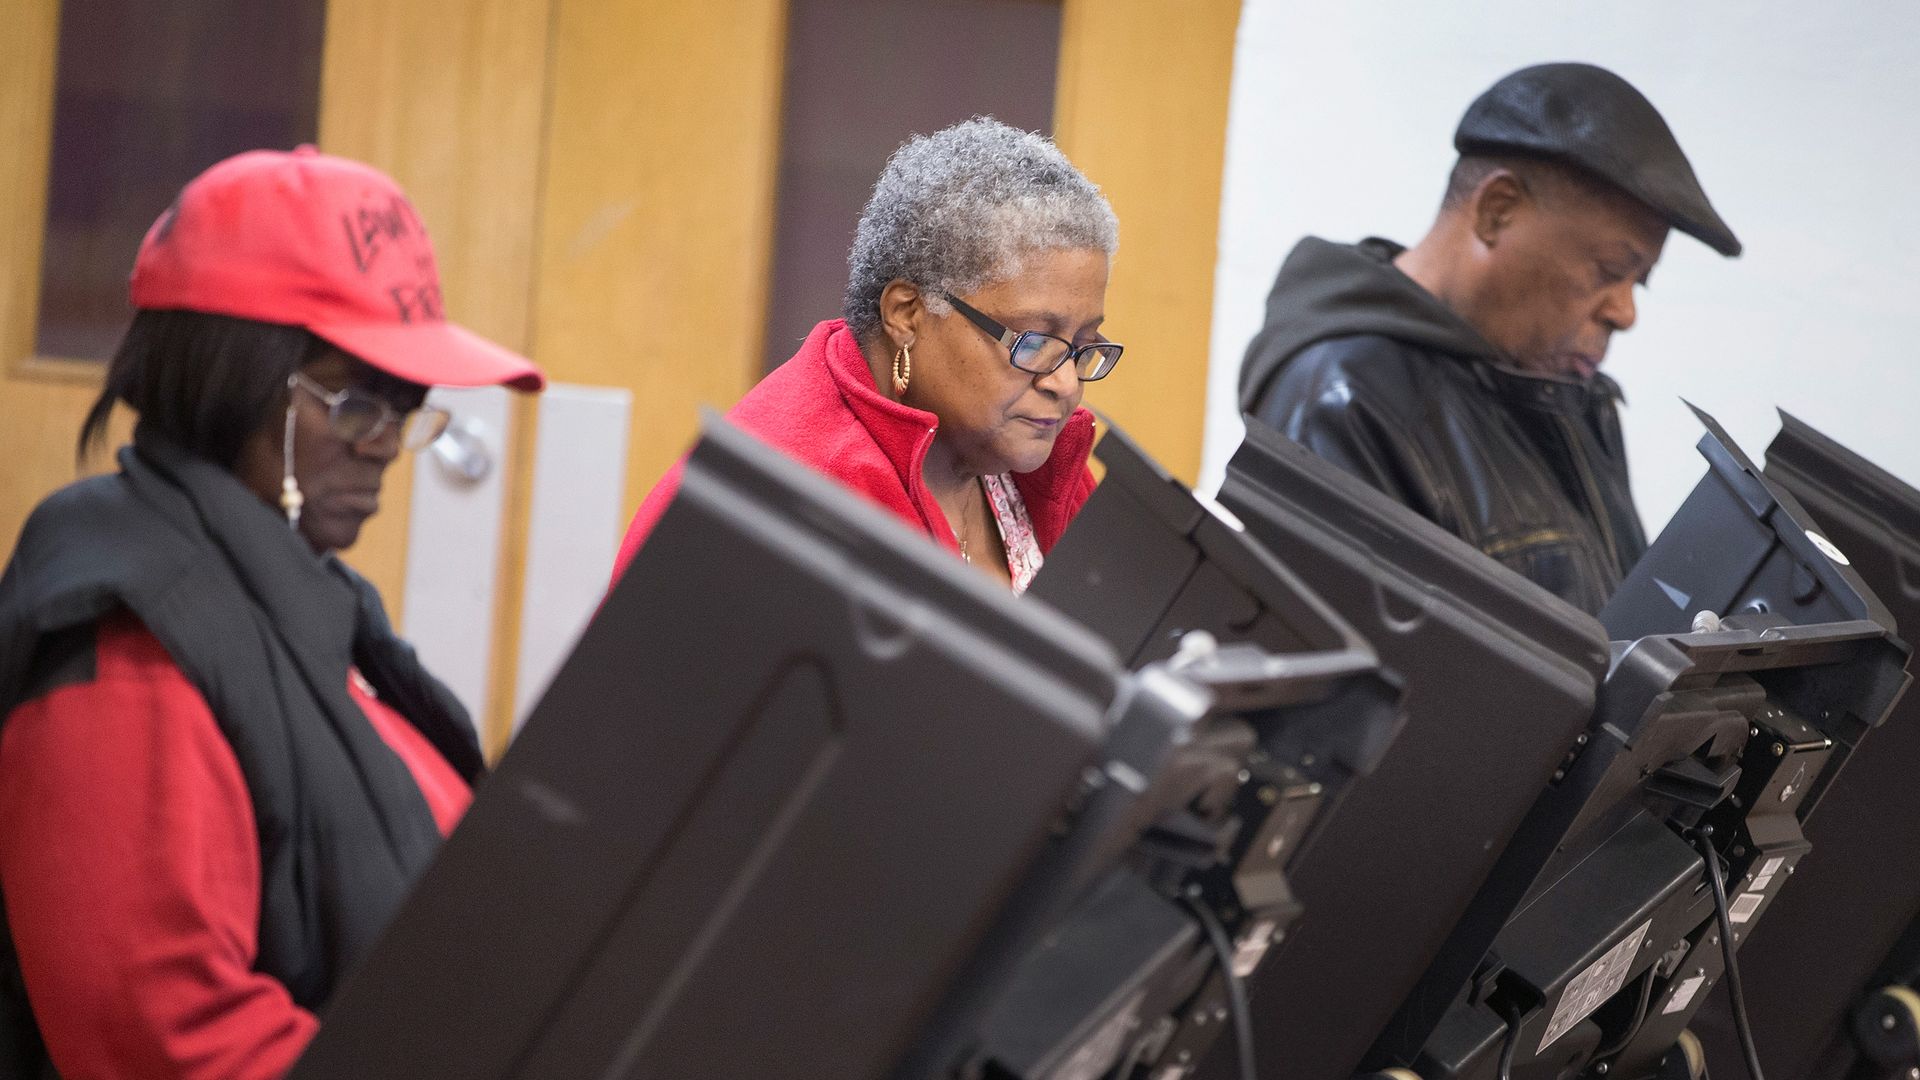 Residents cast their votes at a polling place in Ferguson, Missouri. Photo: Scott Olson/Getty Images